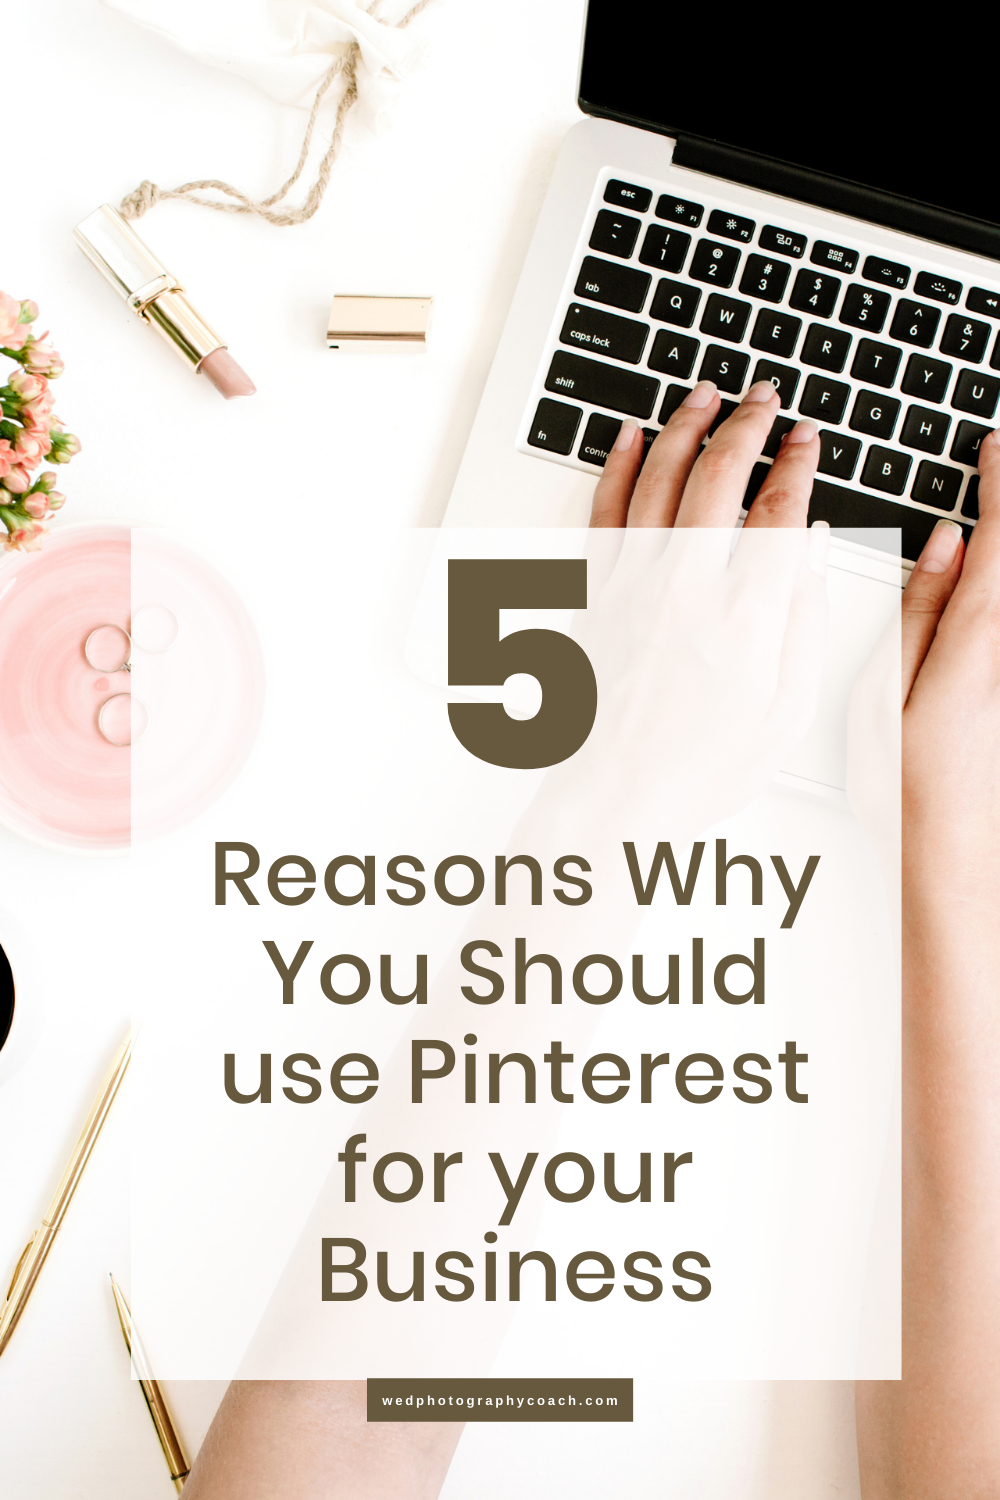 5 reasons why you should use Pinterest for your business